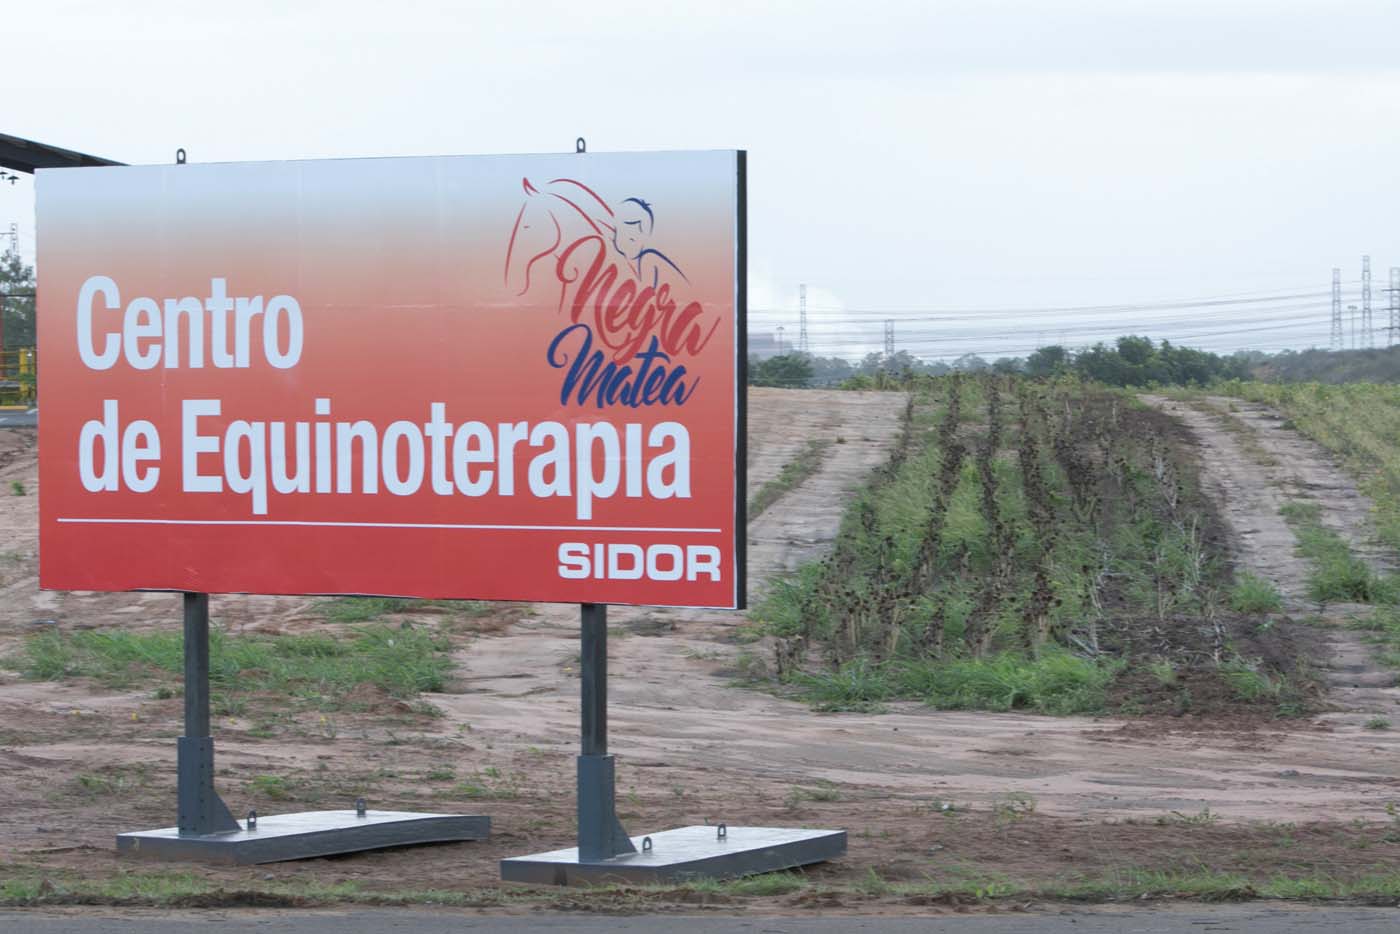 A billboard that reads " Equine-assisted therapy Center" is seen in front of a dried sunflowers field at the entrance of the Sidor steel plant in Puerto Ordaz, Venezuela March 5, 2017. Picture taken March 5, 2017 REUTERS/Stringer FOR EDITORIAL USE ONLY. NO RESALES. NO ARCHIVES.